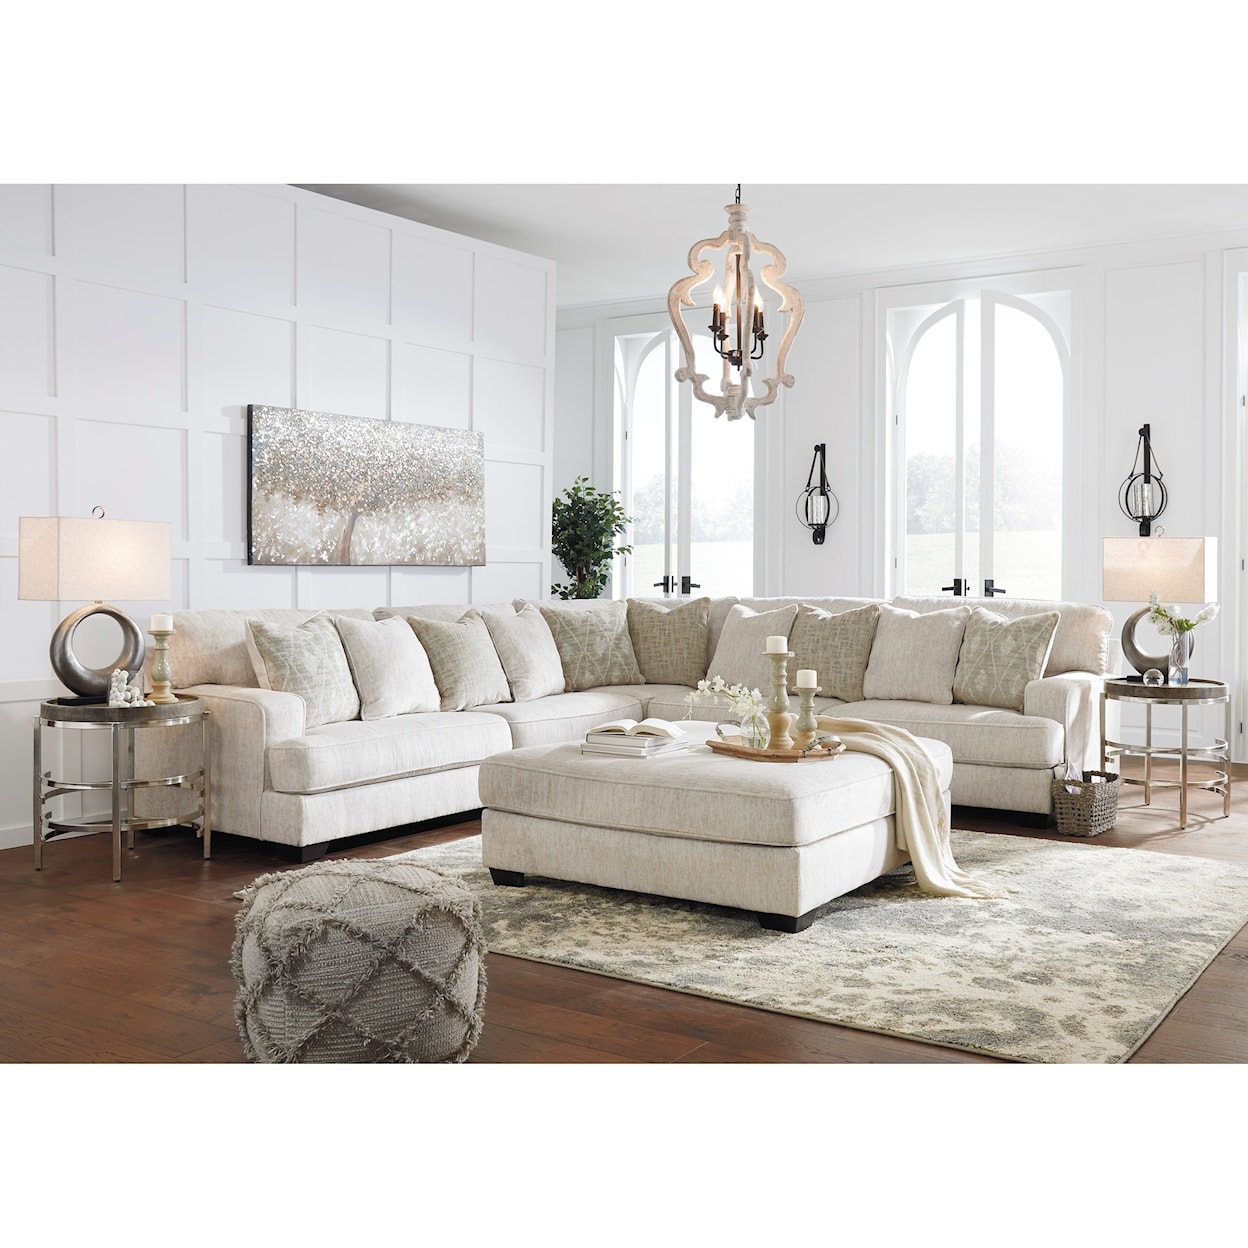 Signature Design by Ashley Rawcliffe Living Room Group